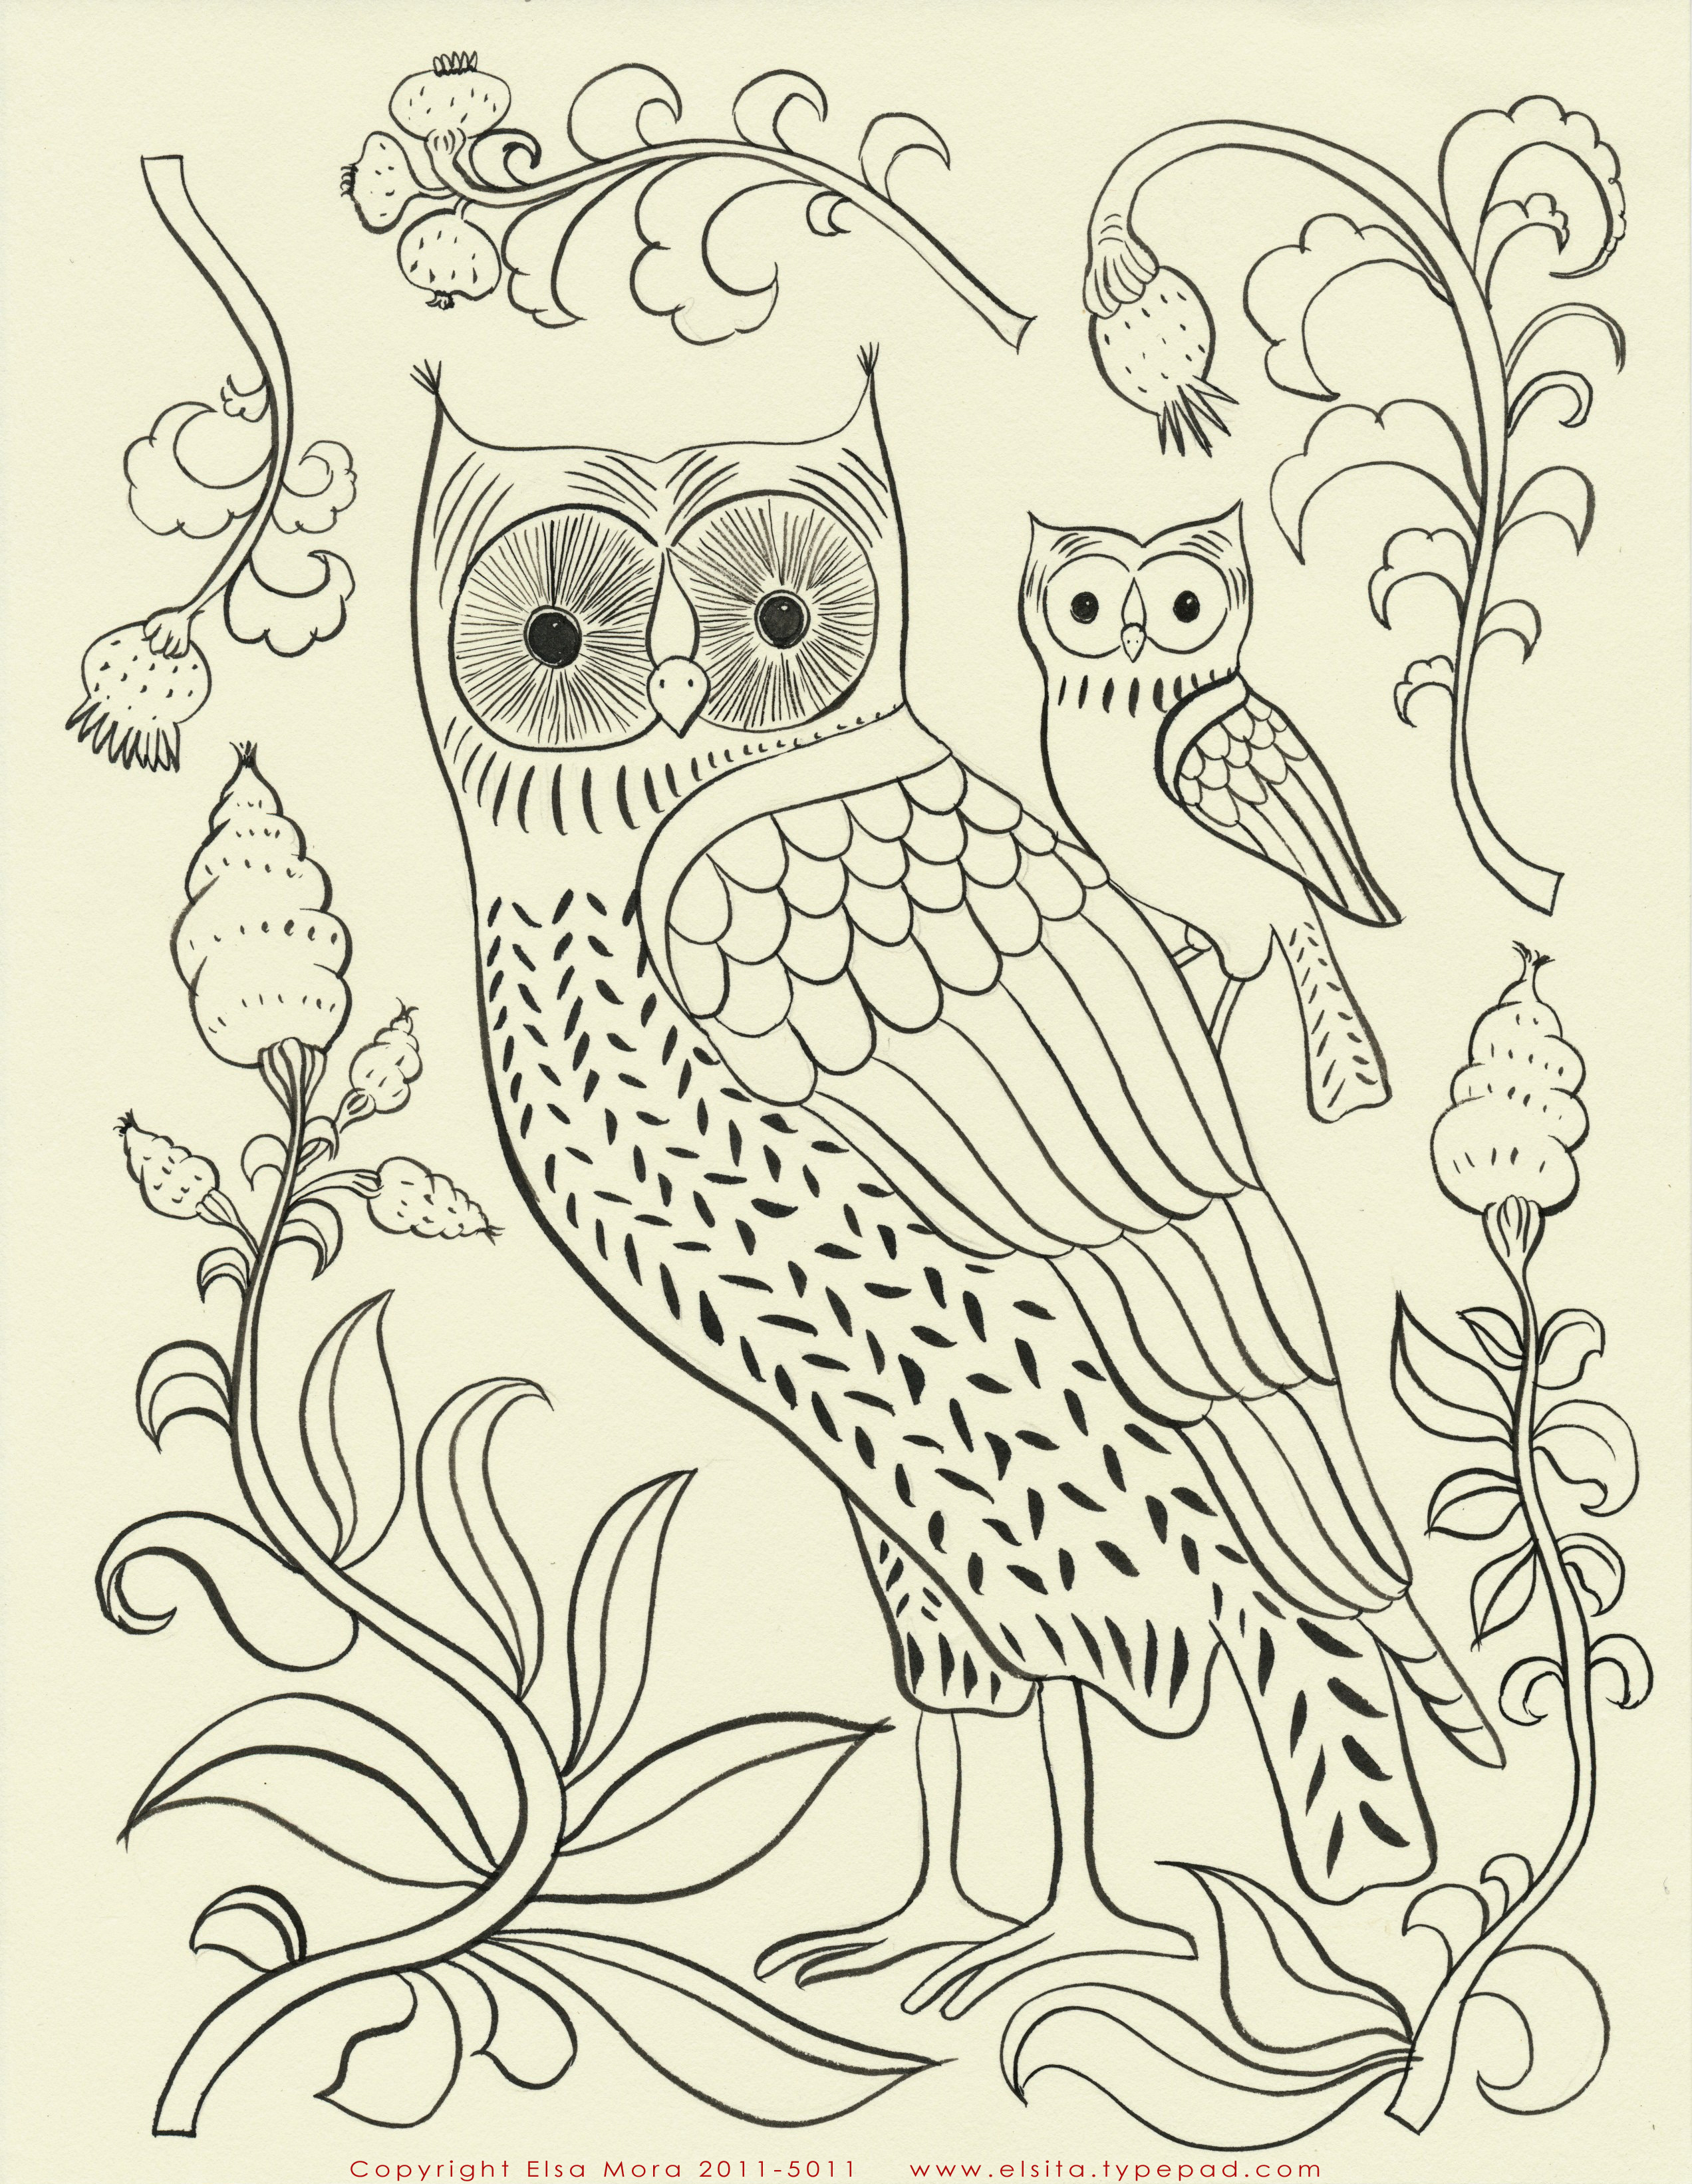 Embroidery Patterns Birds Elsa Mora Two Free Embroidery Patterns For You